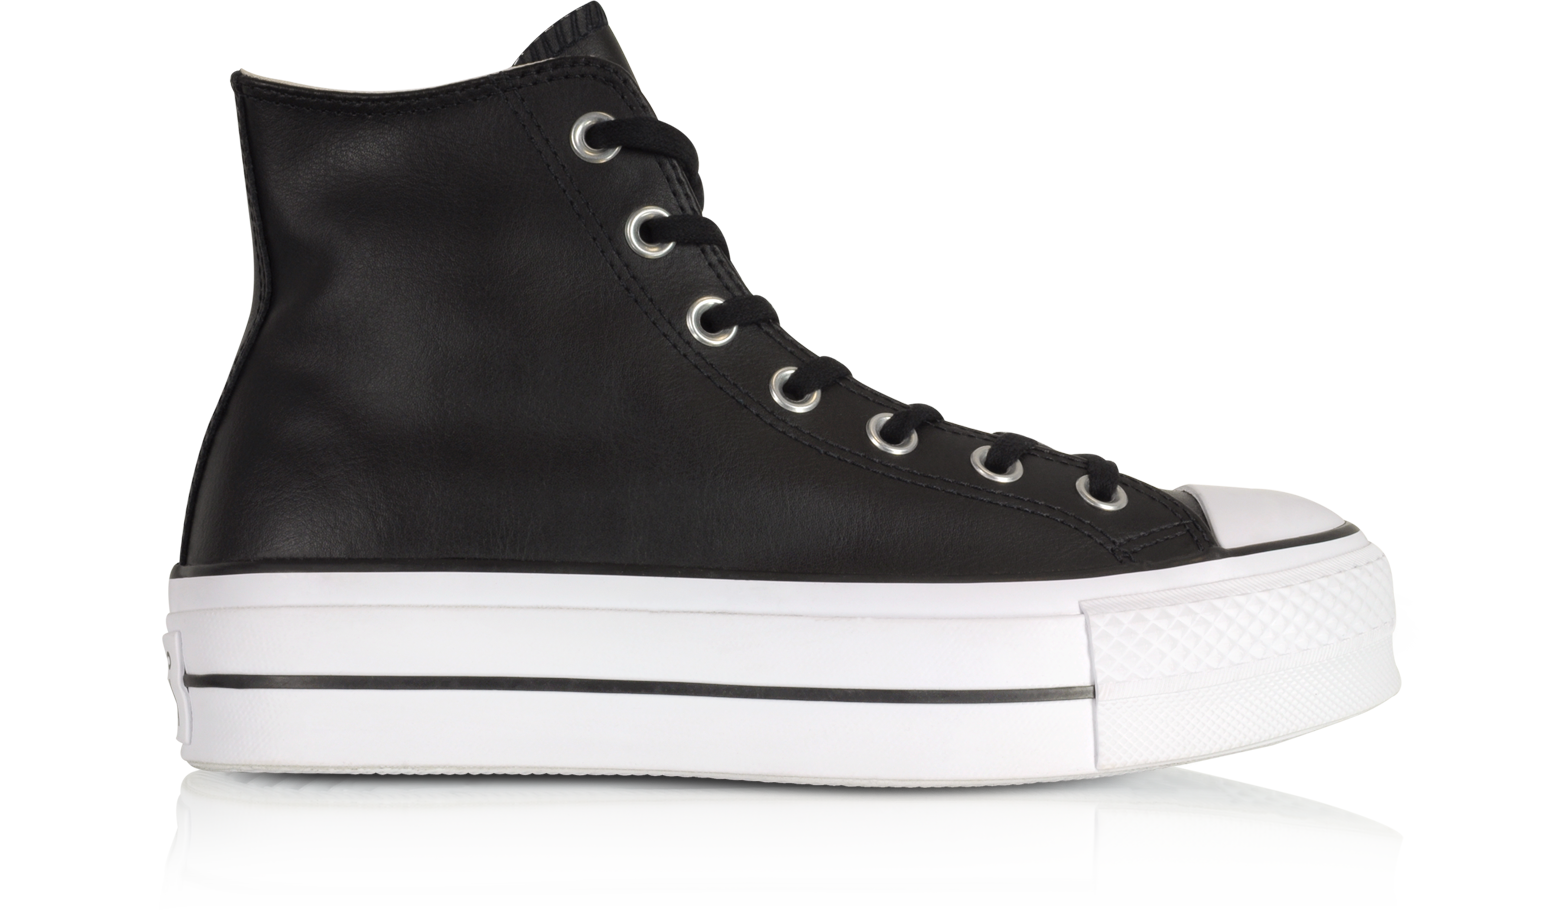 Chuck Taylor All Star High Flatform Sneakers in Pelle Nera Converse Limited  Edition 6.5 (37 EU) su FORZIERI